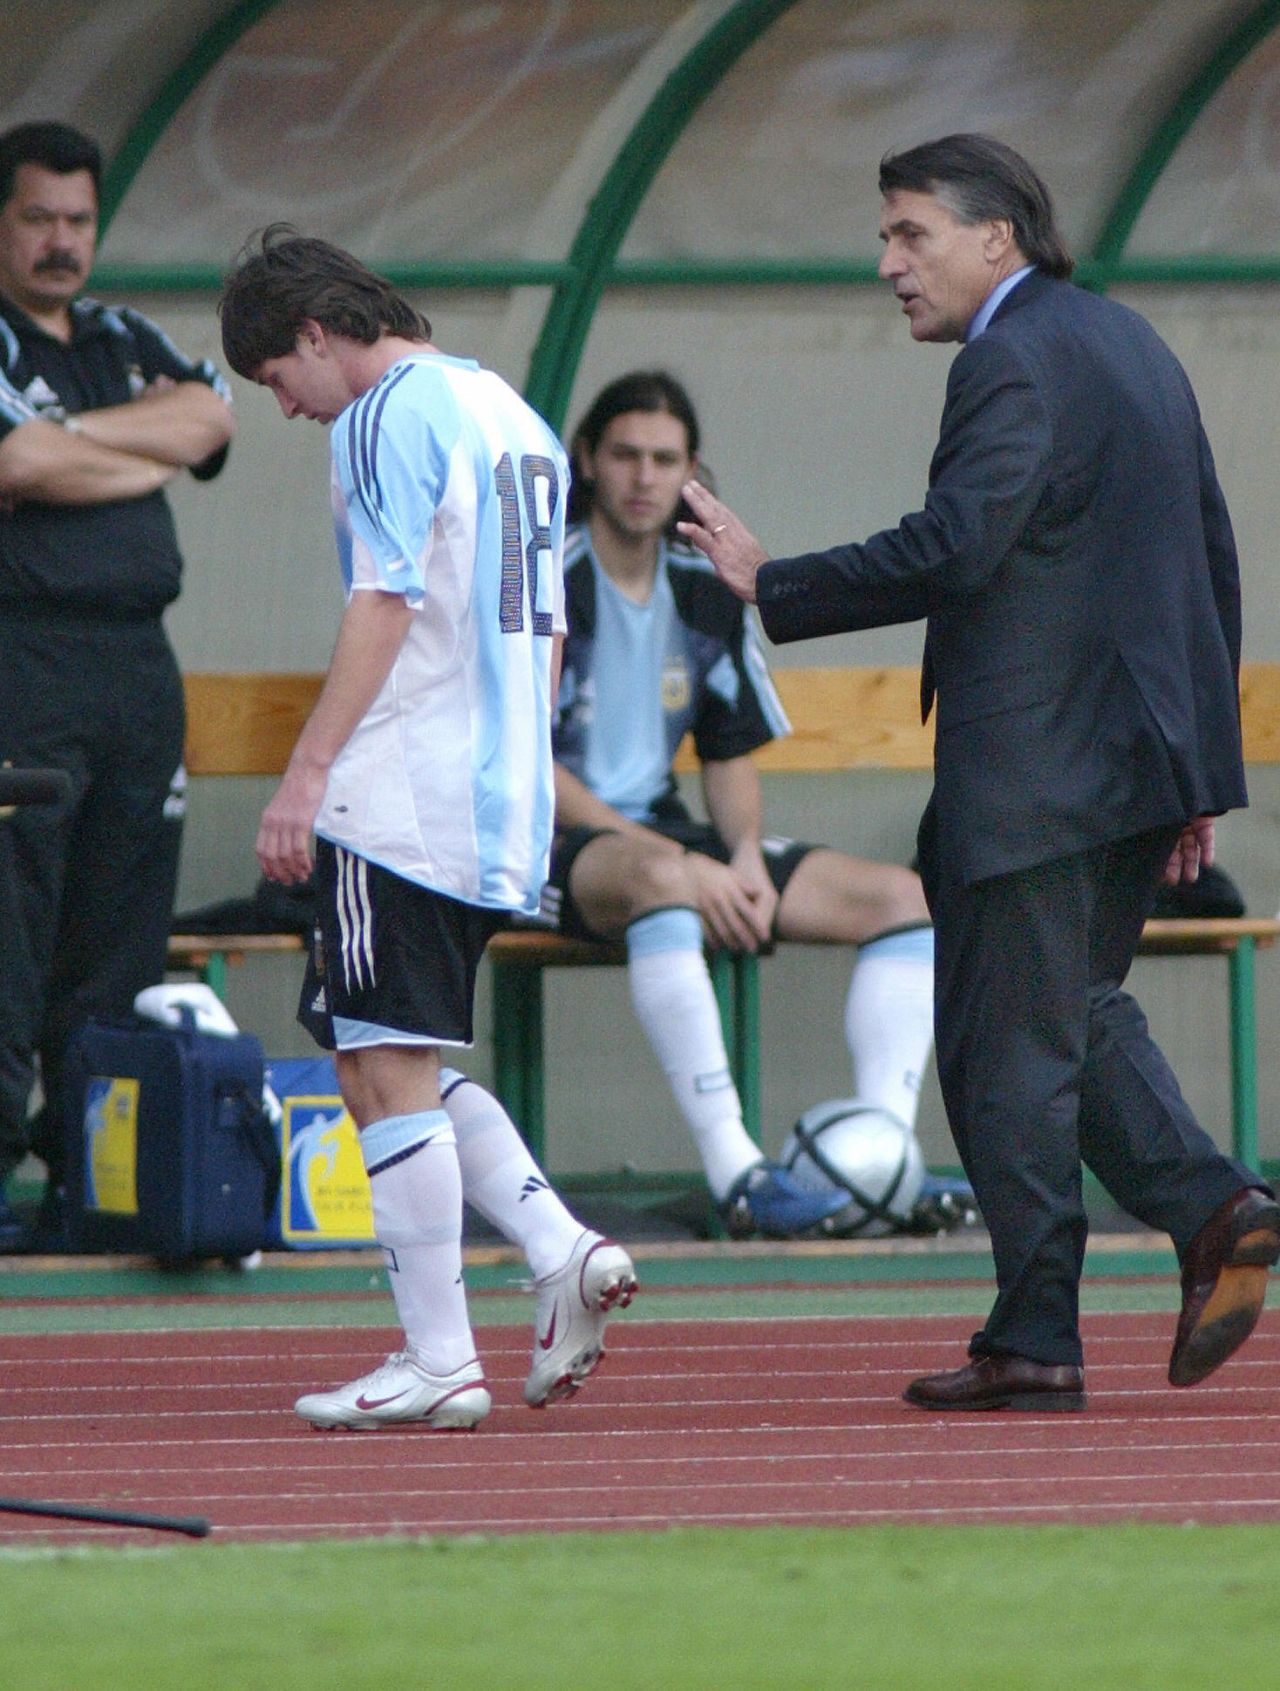 Hot on the heels of his first senior goal, Messi made his debut for the Argentine national side in a friendly against Hungary on August 17.